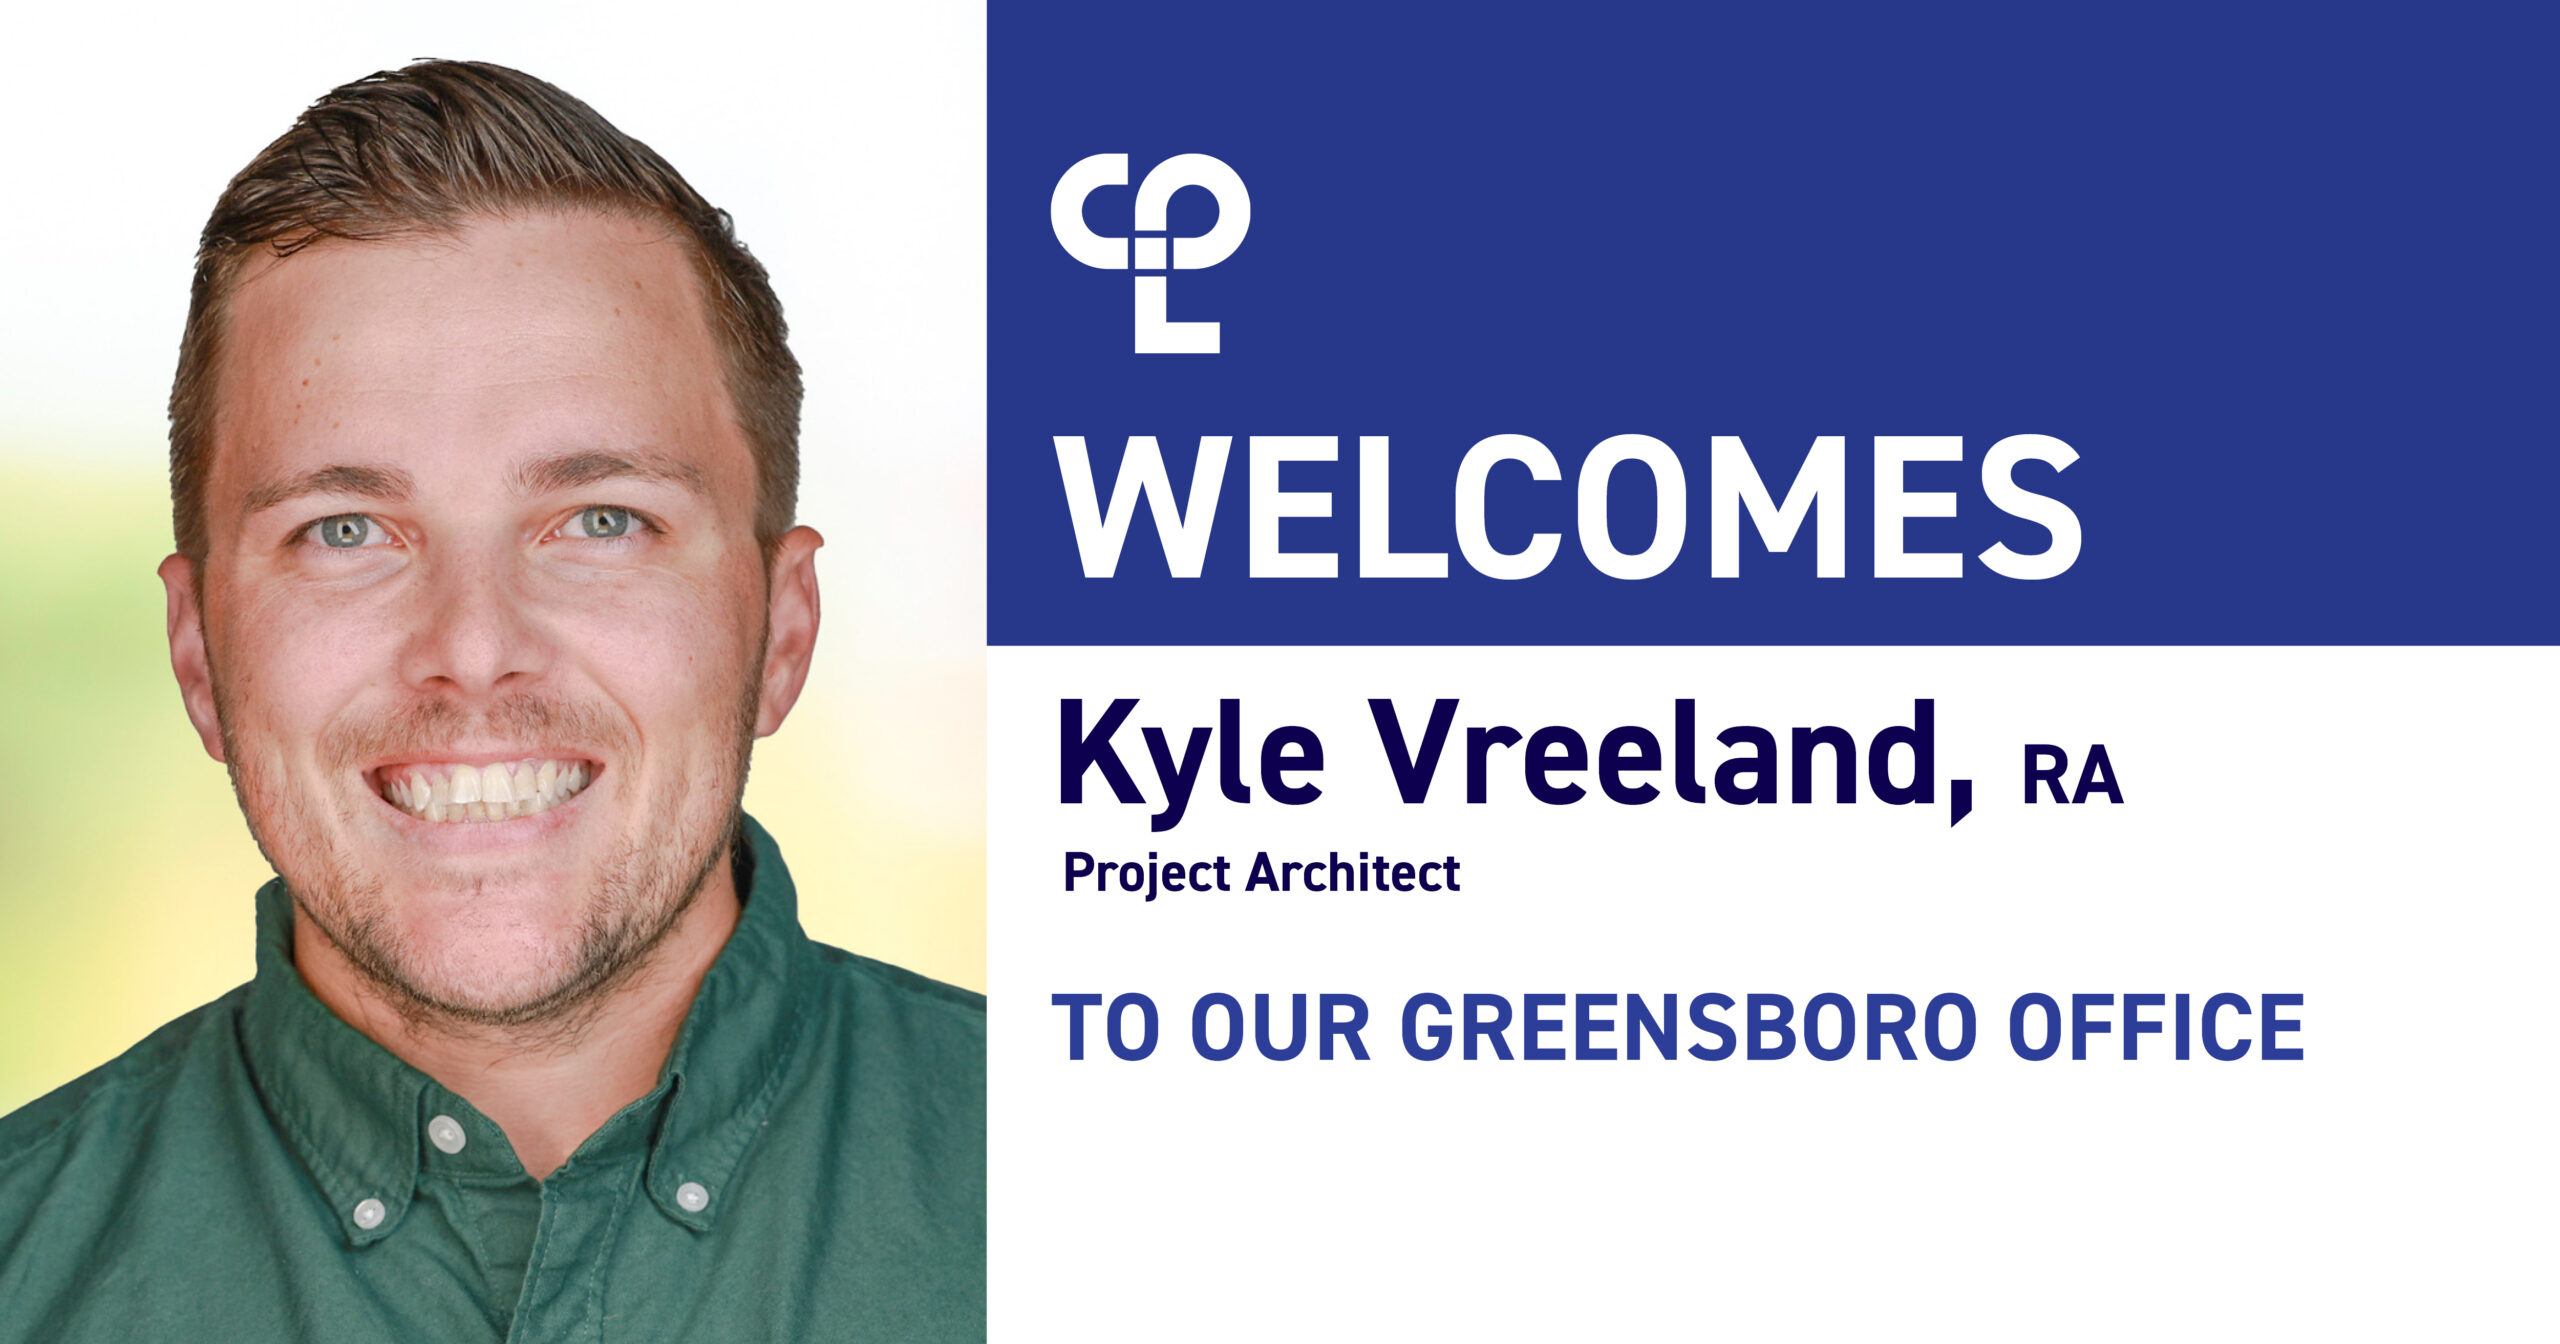 Man in green shirt smiling next to text that says "CPL Welcomes Kyle Vreeland, RA, Project Architect to our Greensboro Office"